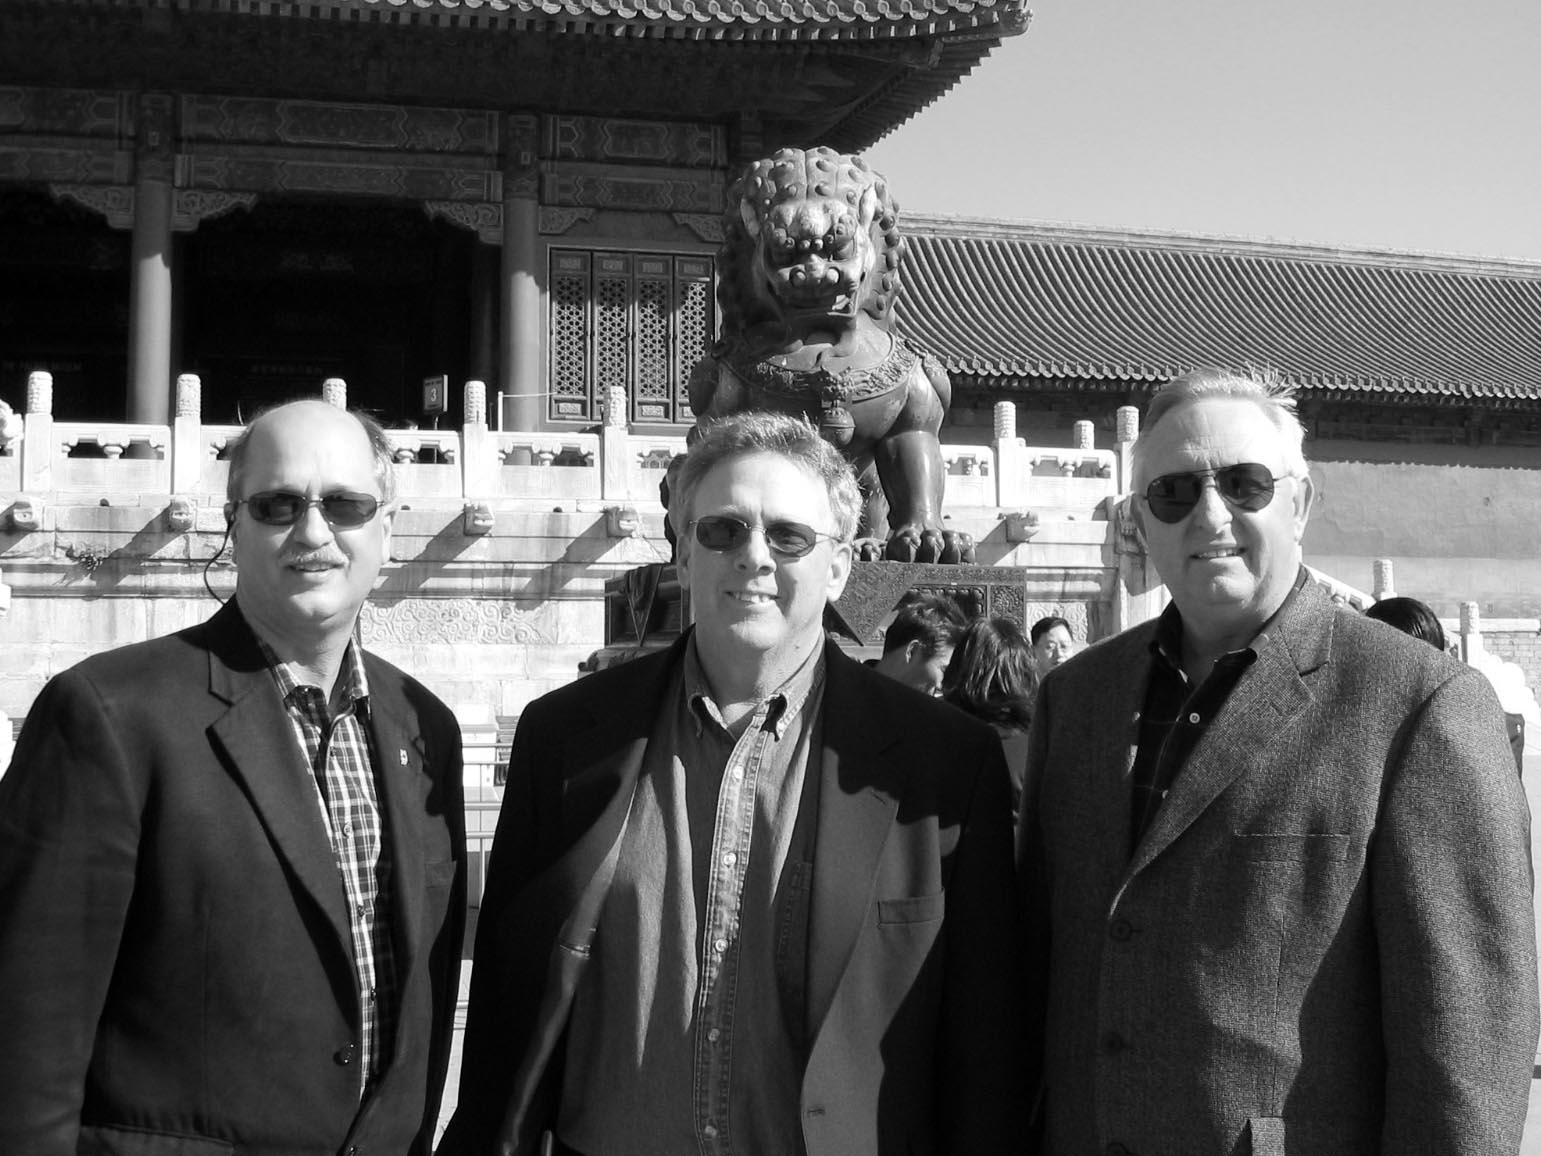 Oklahoma Farm Bureau President Steve Kouplen (right) joined an American Farm Bureau Federation delegation on an agricultural trade mission to China in March 2004 to promote Oklahoma agriculture products while experiencing other cultures. Joined by Kouplen are Indiana Farm Bureau President Don Villowock (left) and Oregon Farm Bureau President Barry Bushue (center).